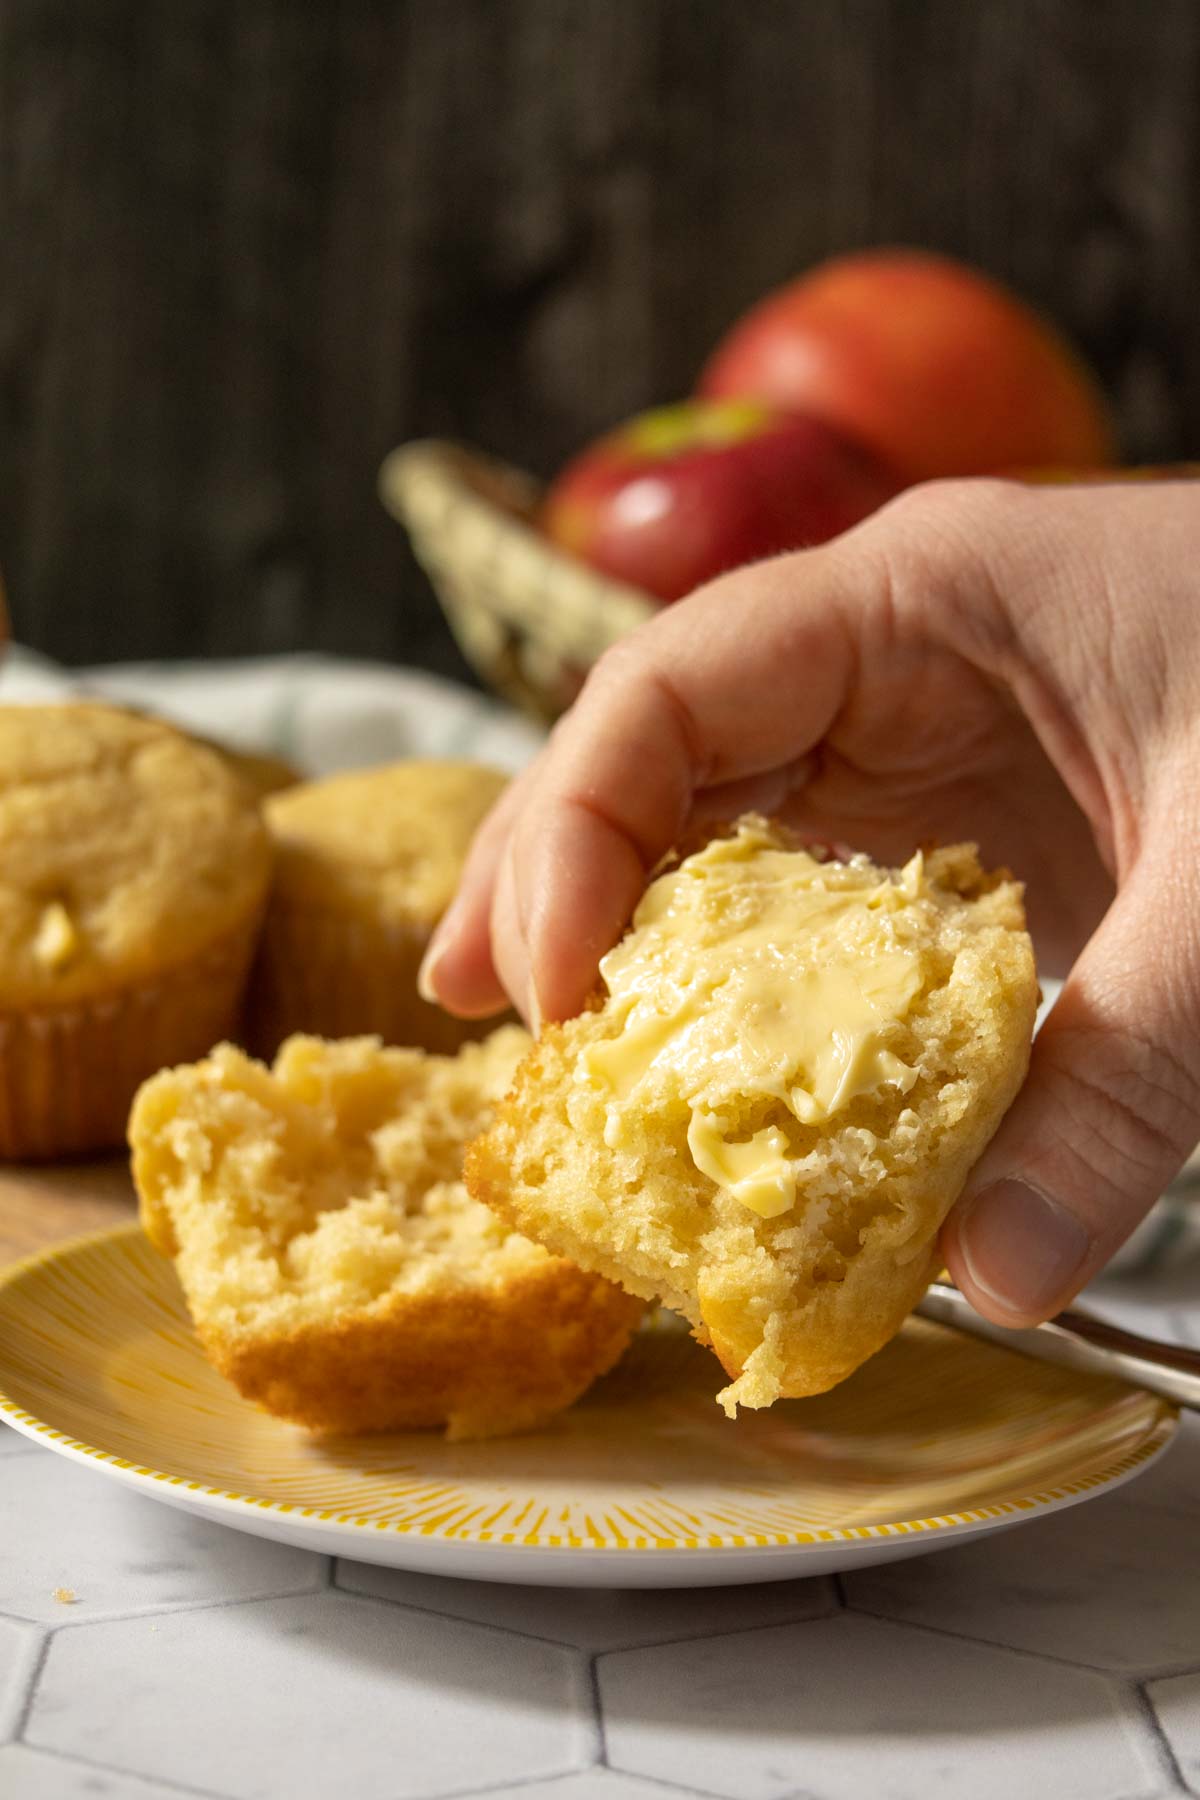 Caucasian hand holding up half an apple muffin with butter spread on it.